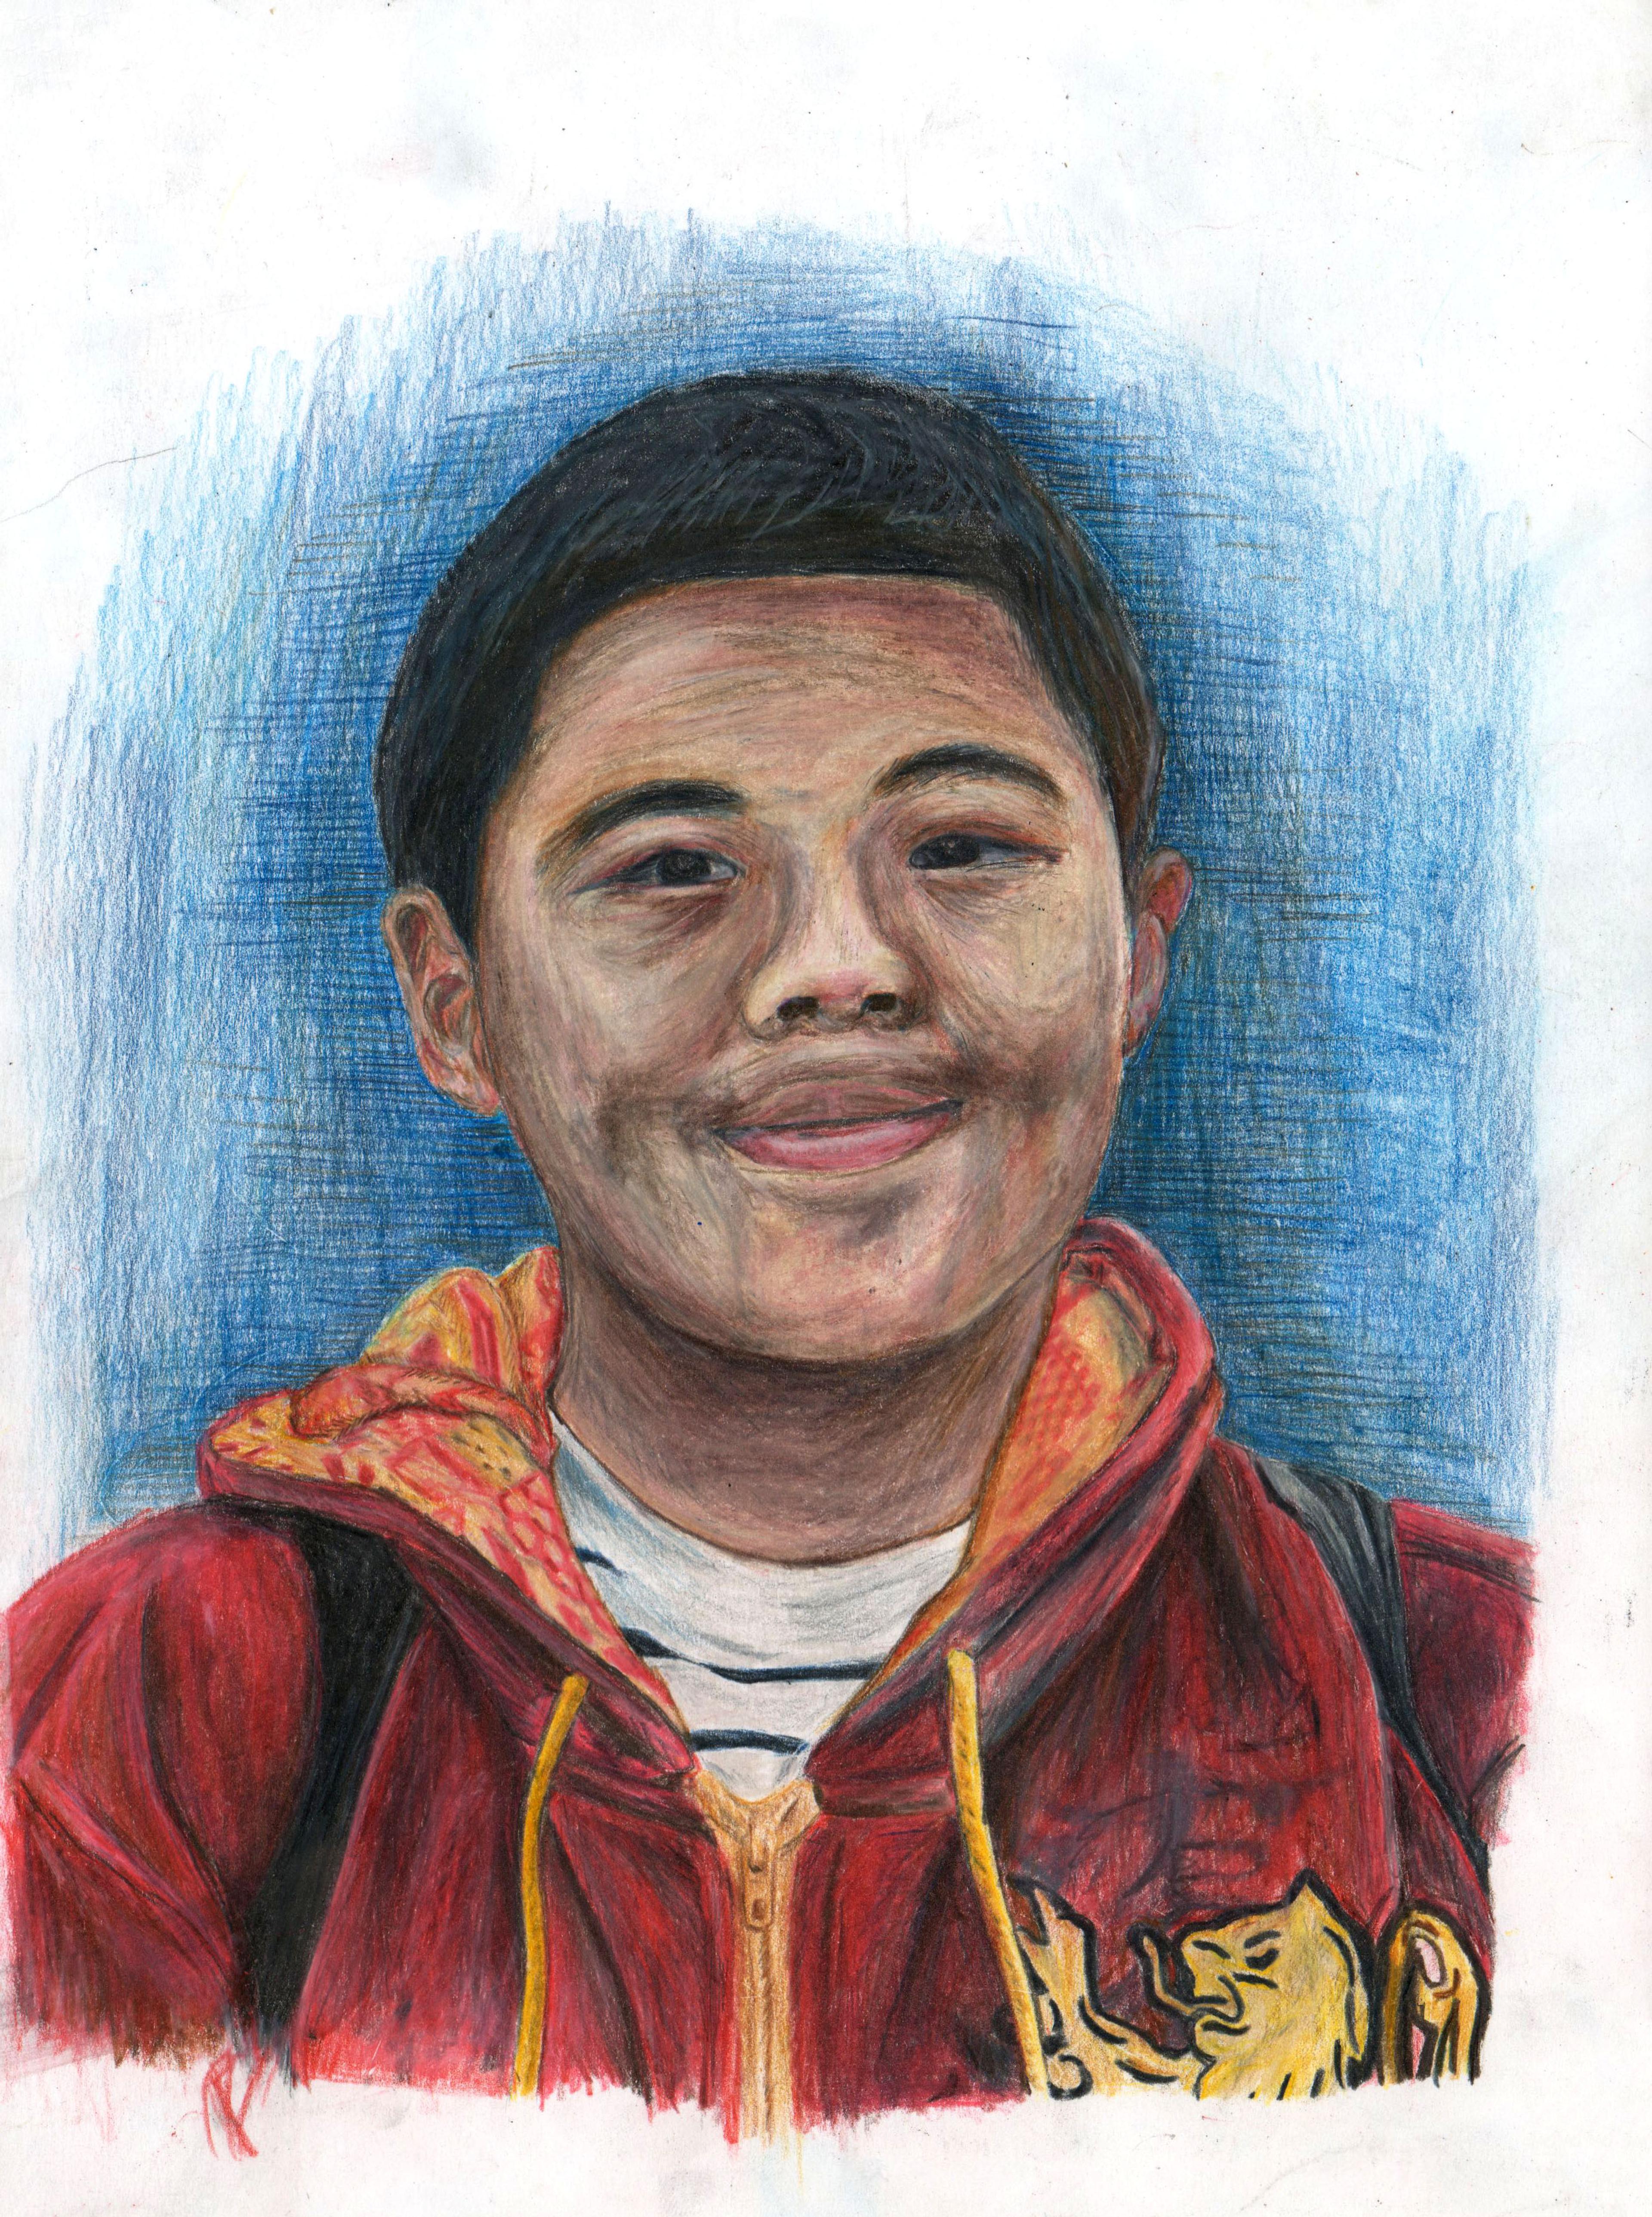 Color pencil self-portrait of an adolescent boy with light brown skin. He is smiling and facing the viewer. He has short black hair and wears a red jacket with a lowered hood and a yellow heraldic lion emblem on the left side of his chest. The background is a blue crosshatched vignette that fades to white.